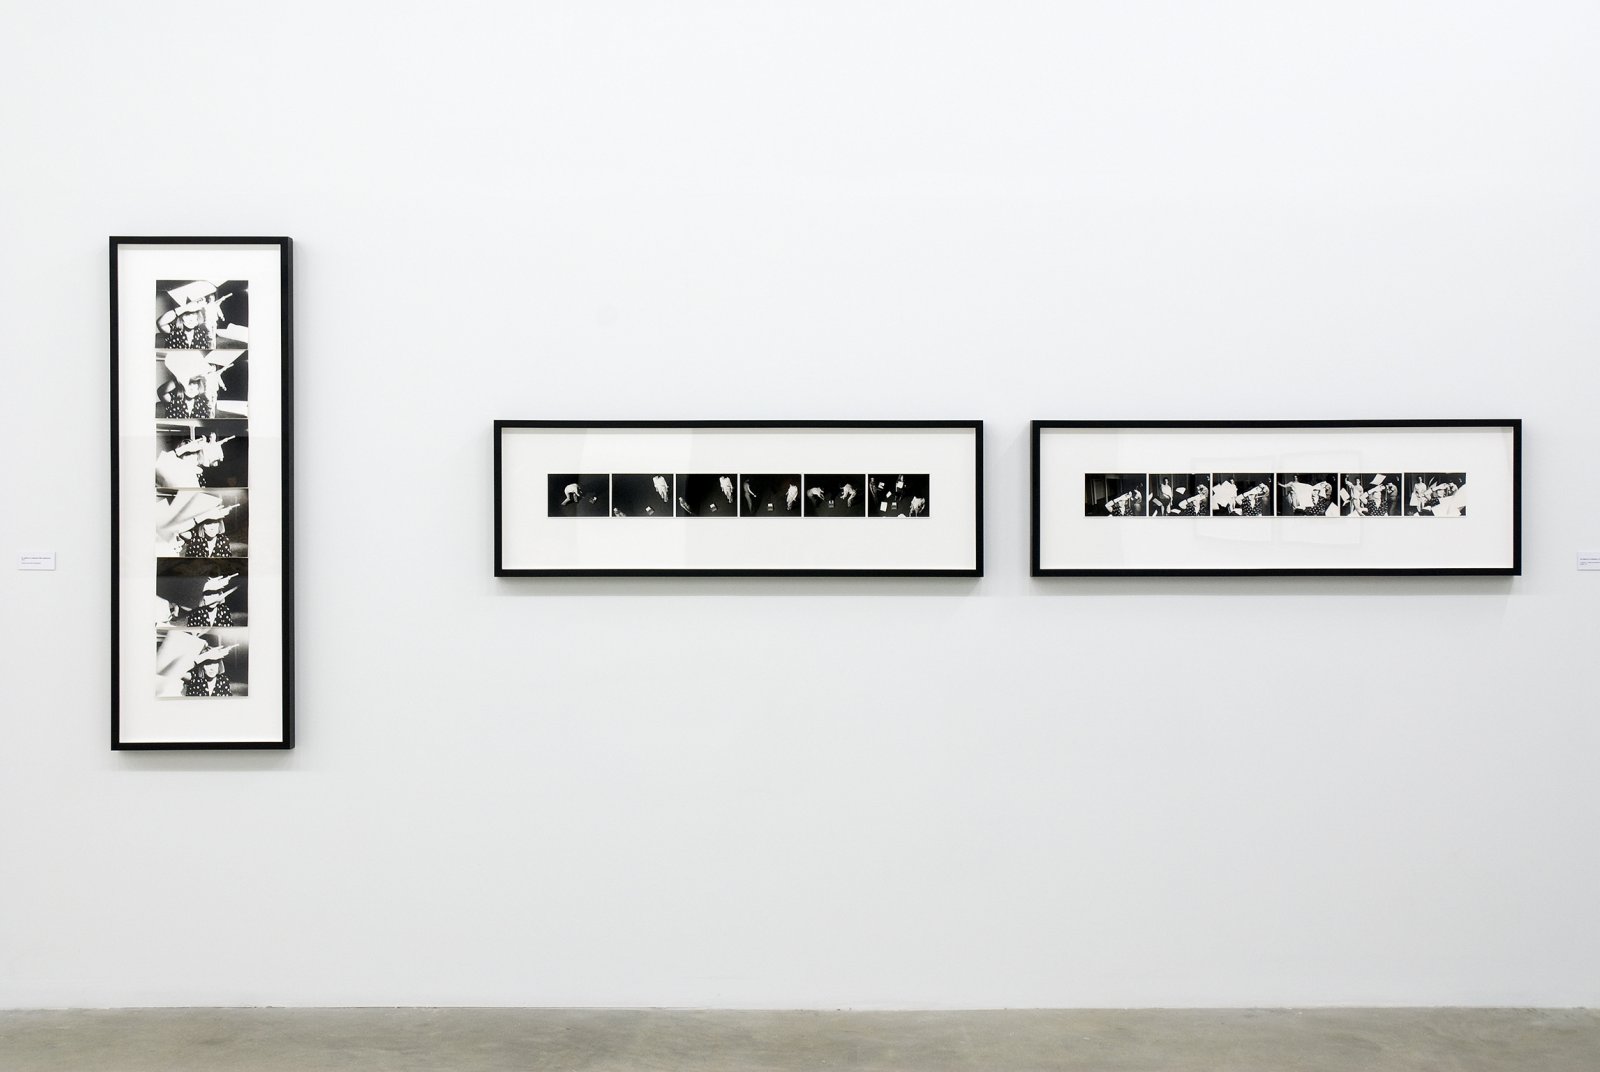 ​Ian Wallace, installation view, Works 1970–1979, Catriona Jeffries, 2009 by Ian Wallace